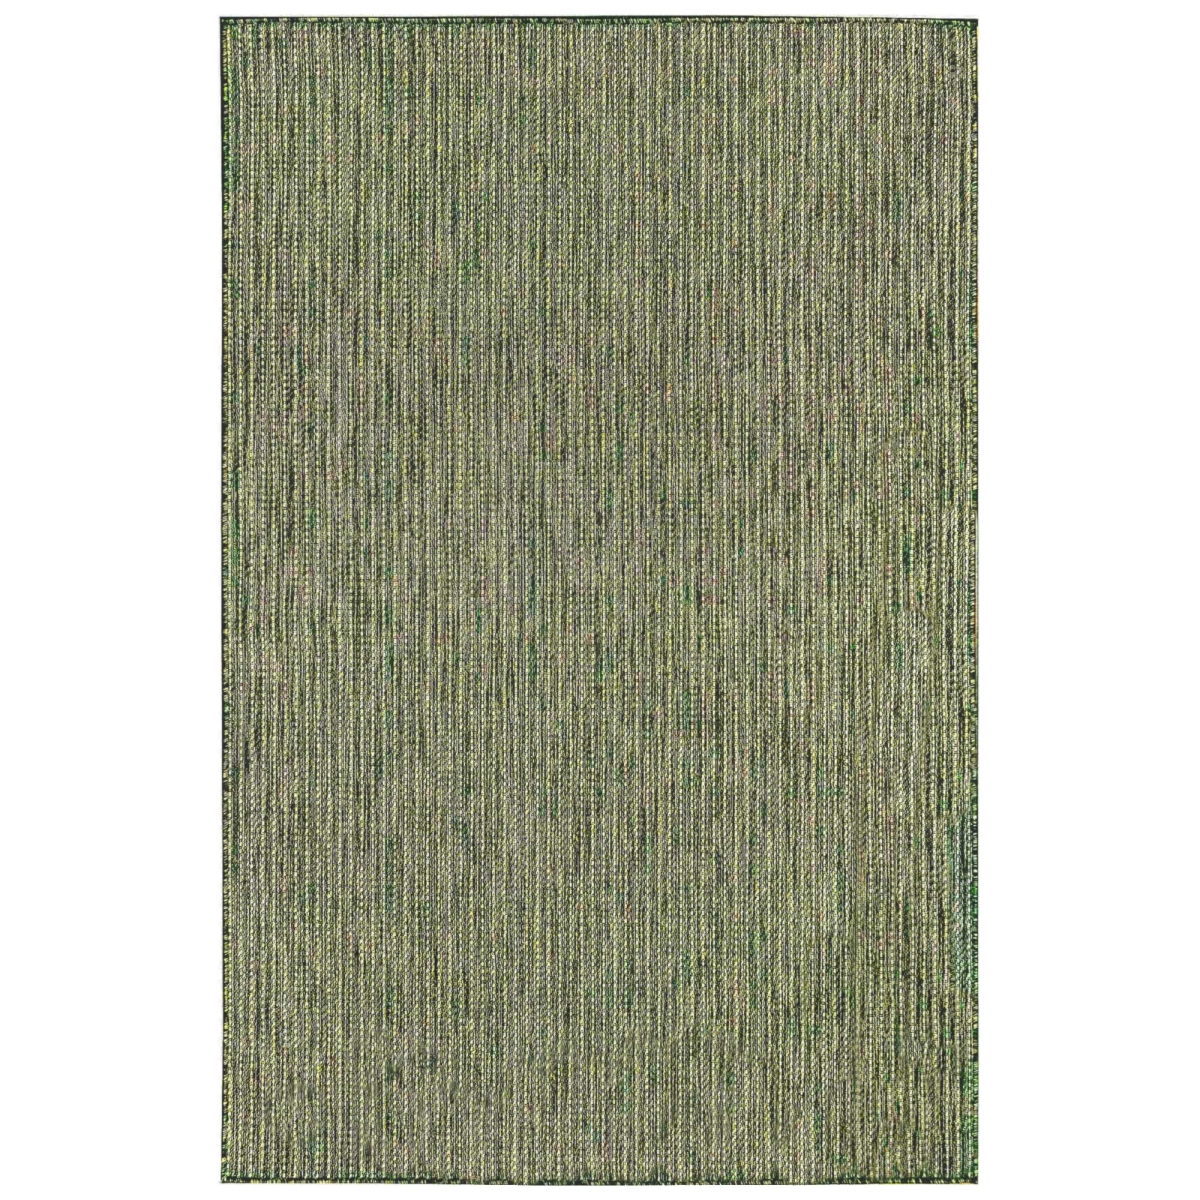 Trans-ocean Imports Cre69842206 6 Ft. 6 In. X 9 Ft. 4 In. Liora Manne Carmel Texture Stripe Indoor & Outdoor Rug Wilton Woven Rectangular Rug - Green